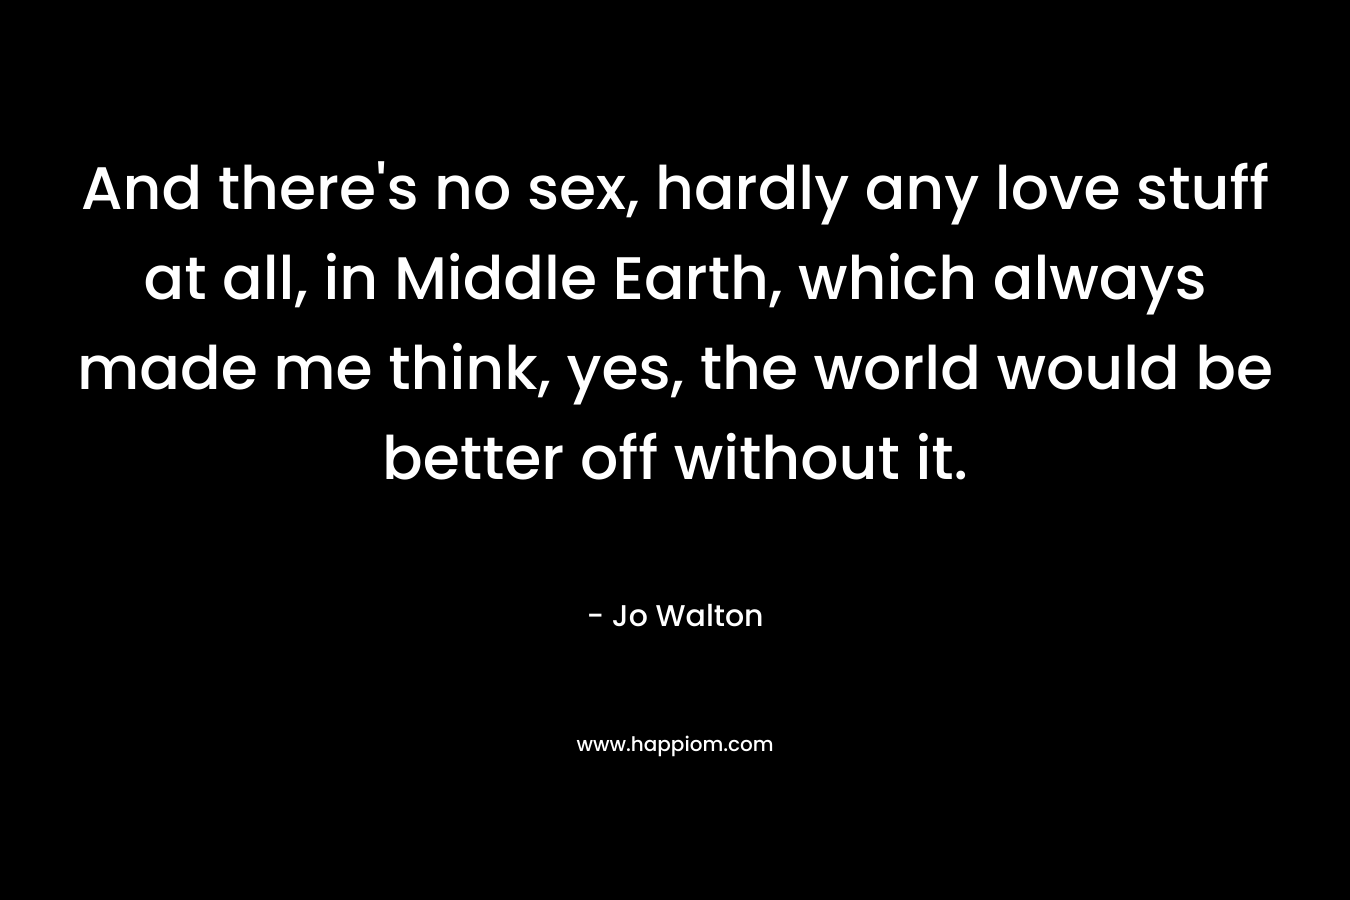 And there's no sex, hardly any love stuff at all, in Middle Earth, which always made me think, yes, the world would be better off without it.